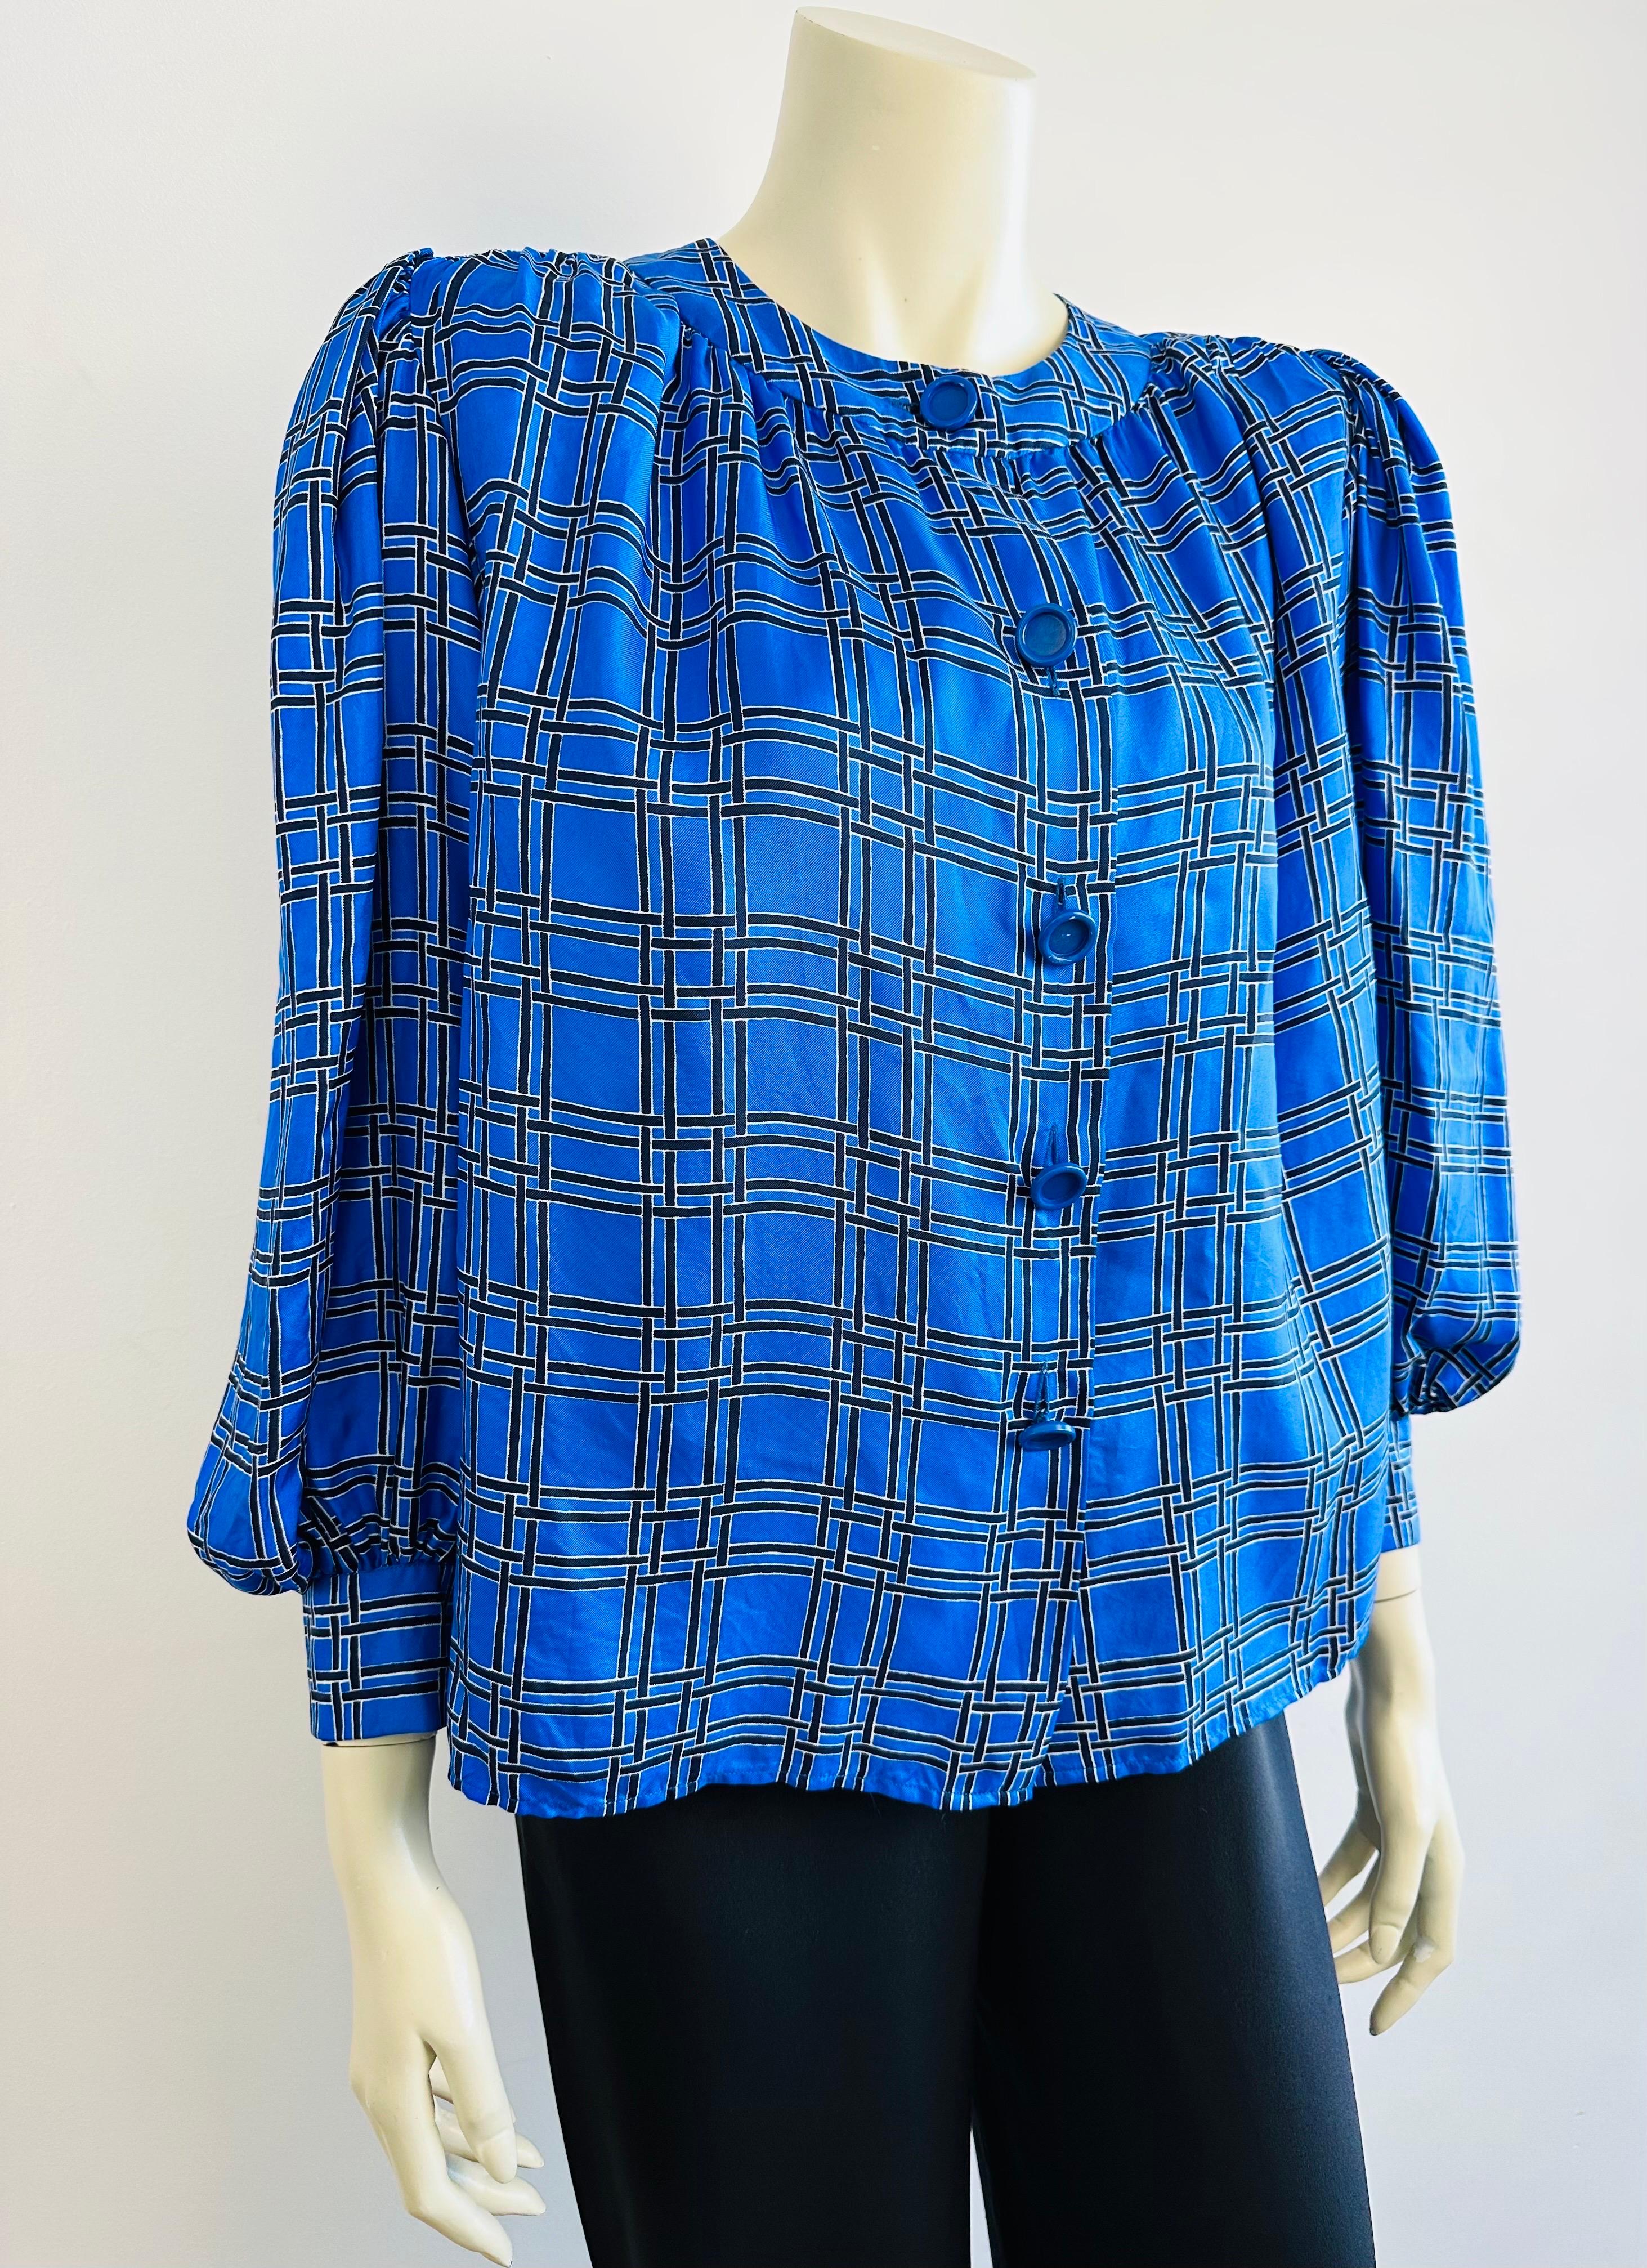 Yves saint Laurent silk blouse from the 1970s, check pattern on royal blue background
Round collar
Balloon sleeves tightened at the cuffs and closed with a button.
Pleated front shoulders
Royal blue plastic buttons
Loose fit
Size 36 please refer to